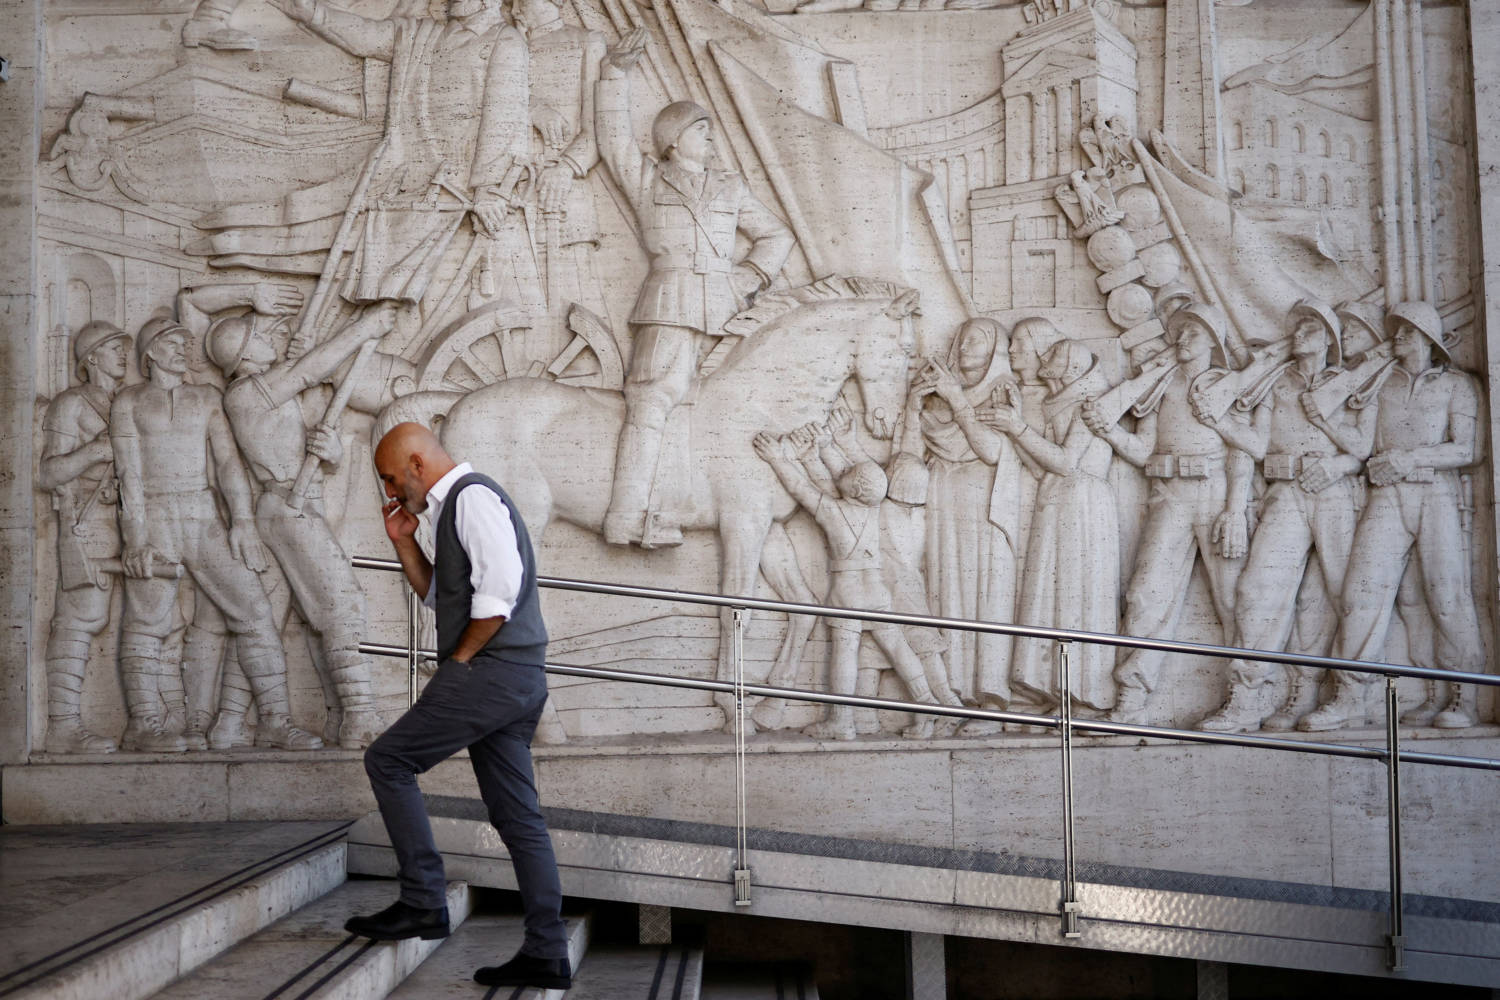 File Photo: Mussolini's Image Hangs Over Rome 100 Years After He Grabbed Power